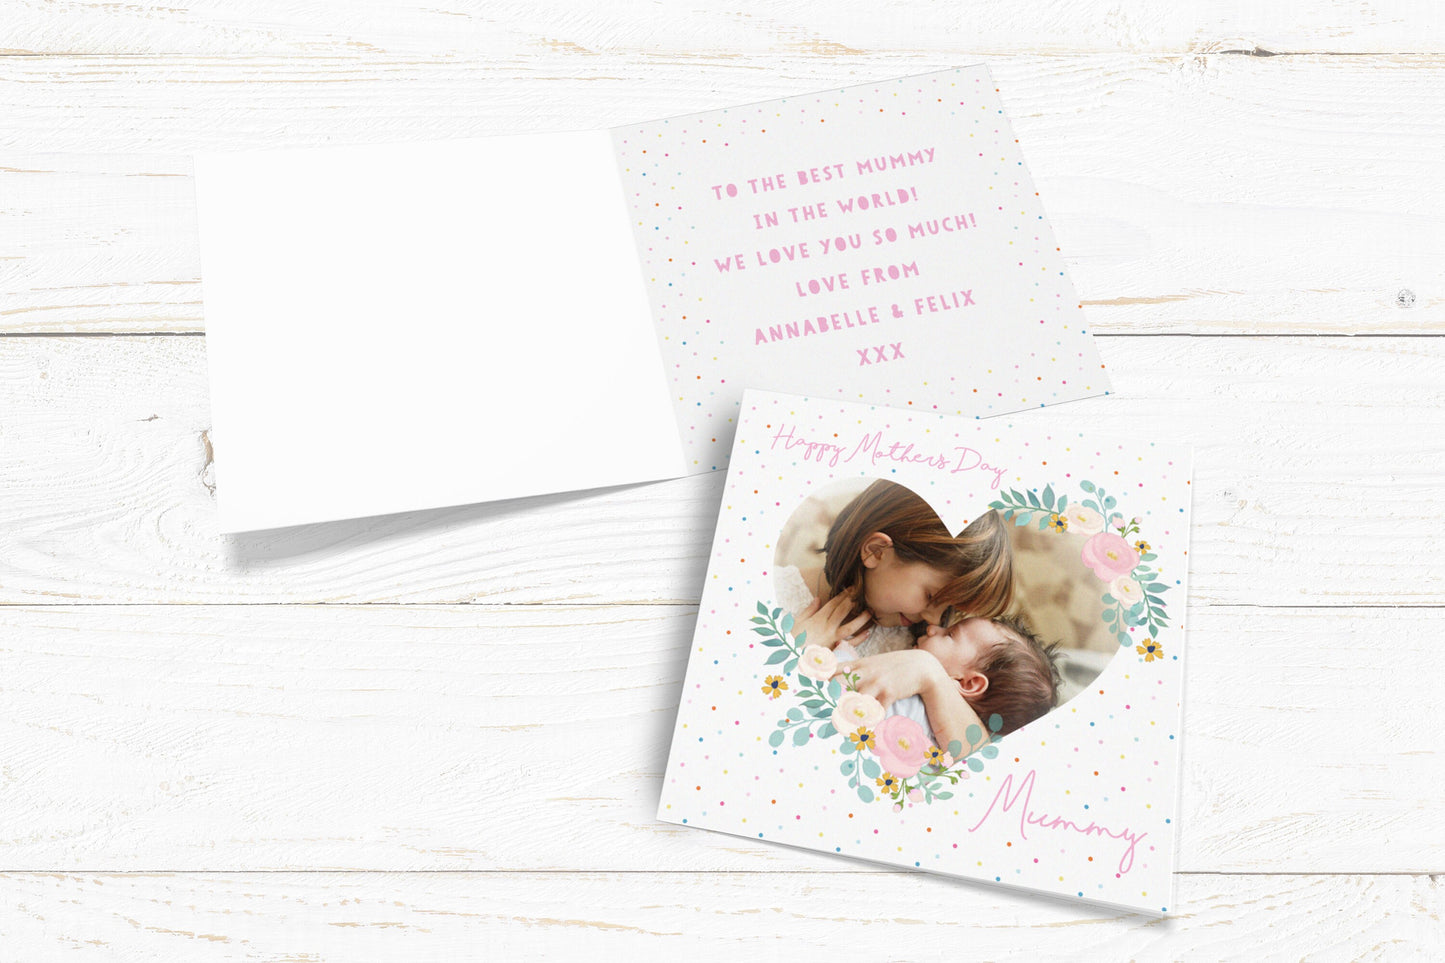 Floral Heart Photo Card. Mother's Day Card. Photo Upload Card. Photo Birthday Card. Personalised Mother's Day Card. Send Direct Option.